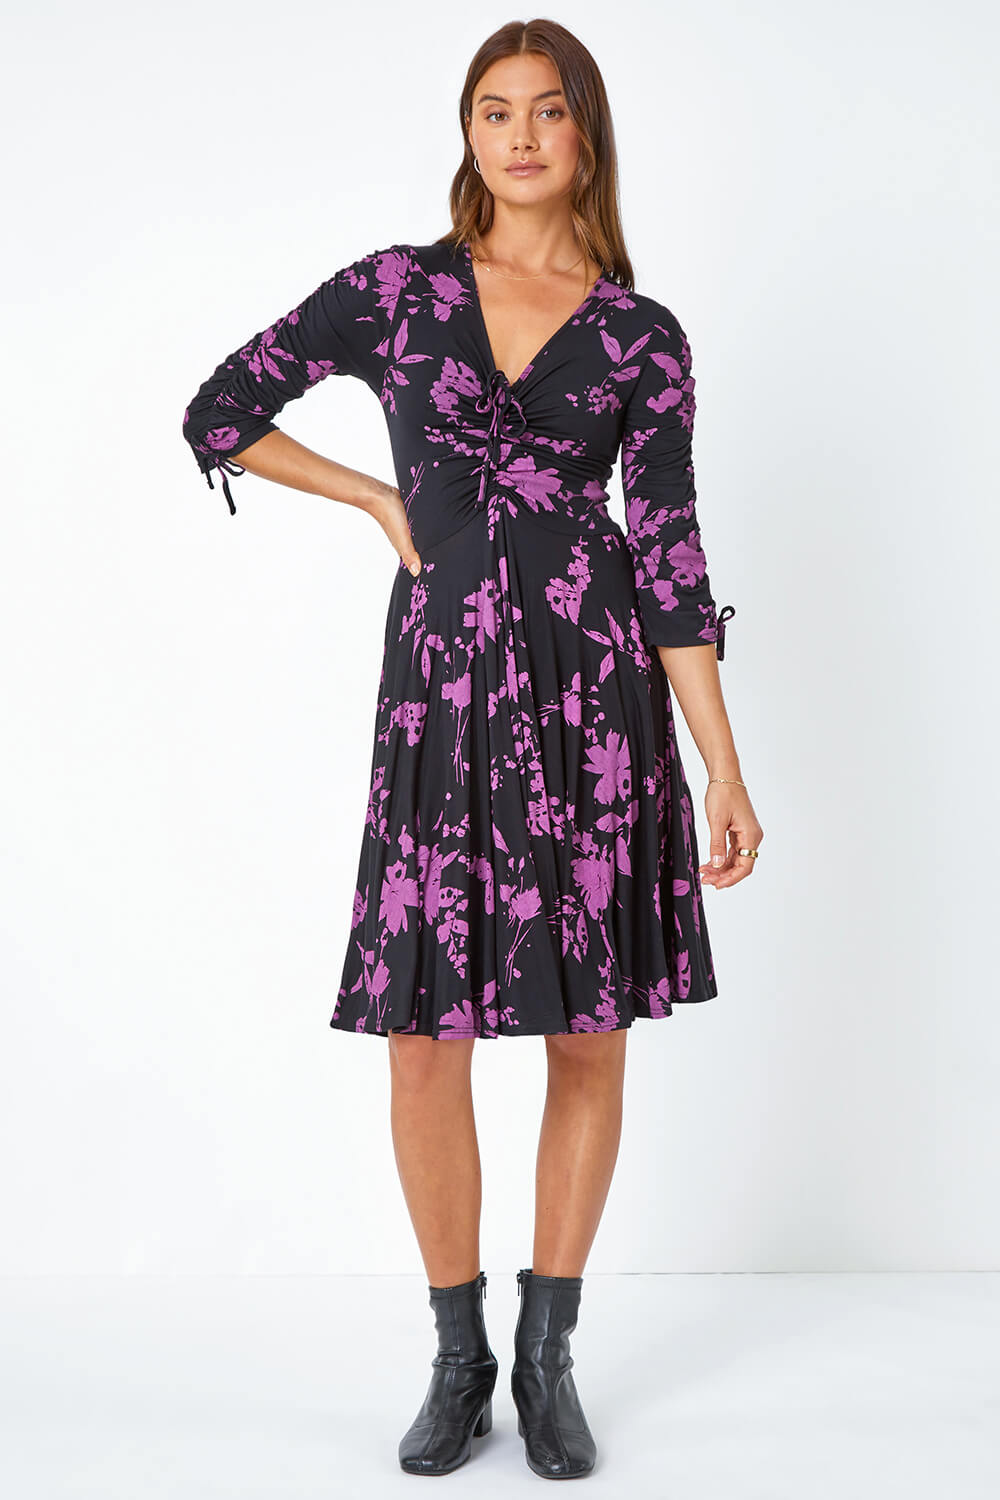 Mauve Floral Shadow Print Ruched Stretch Dress, Image 2 of 5